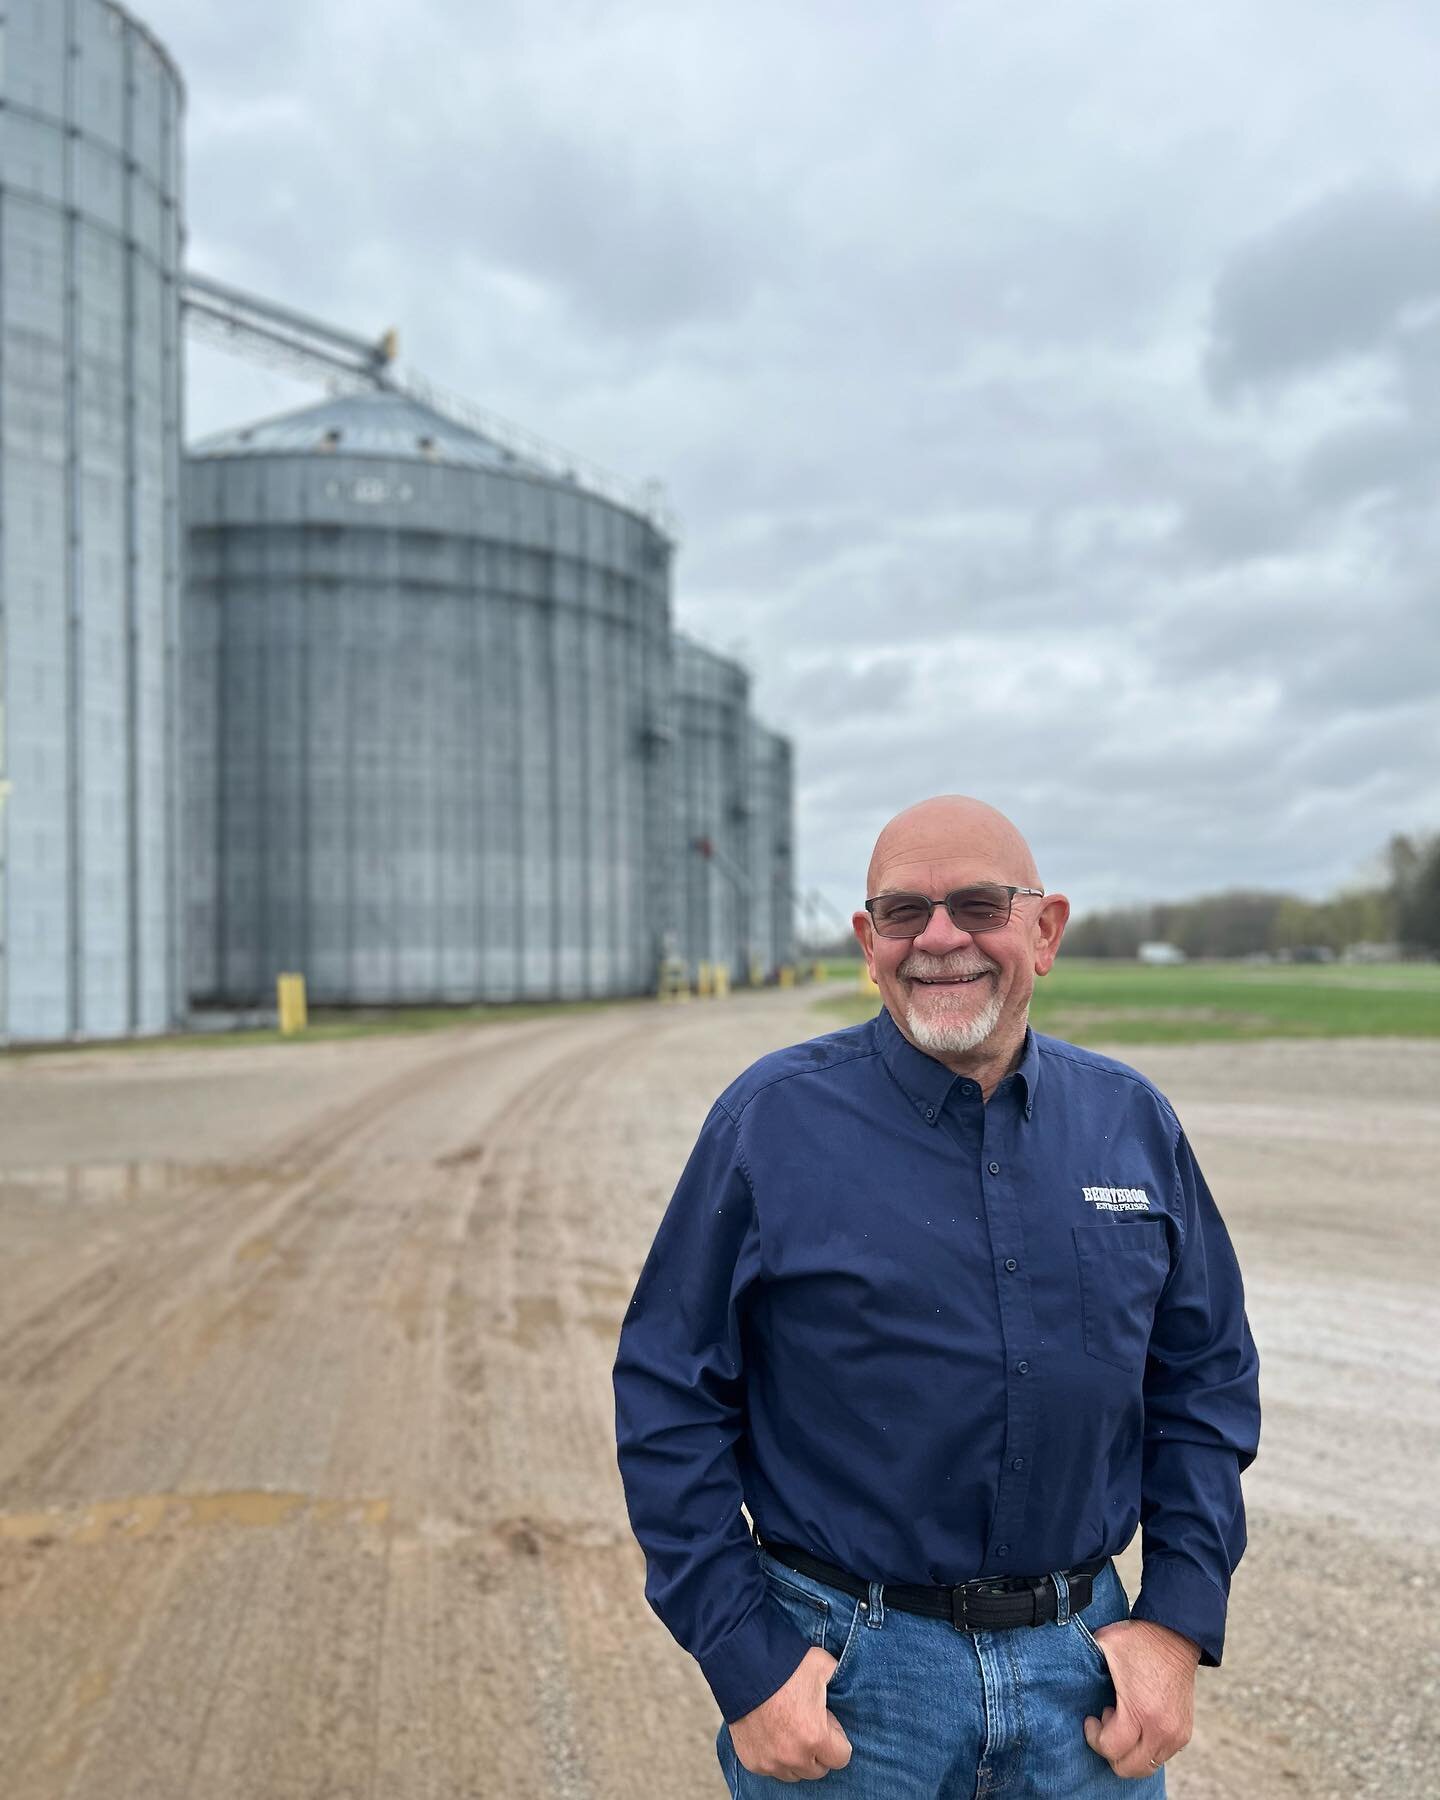 Meet Joe Hassle, the oldest of the three brothers who own and operate Berrybrook Enterprises. Born and raised in southwest Michigan, his passion for farming was instilled at an early age thanks to his parents. After graduating from Michigan State Uni